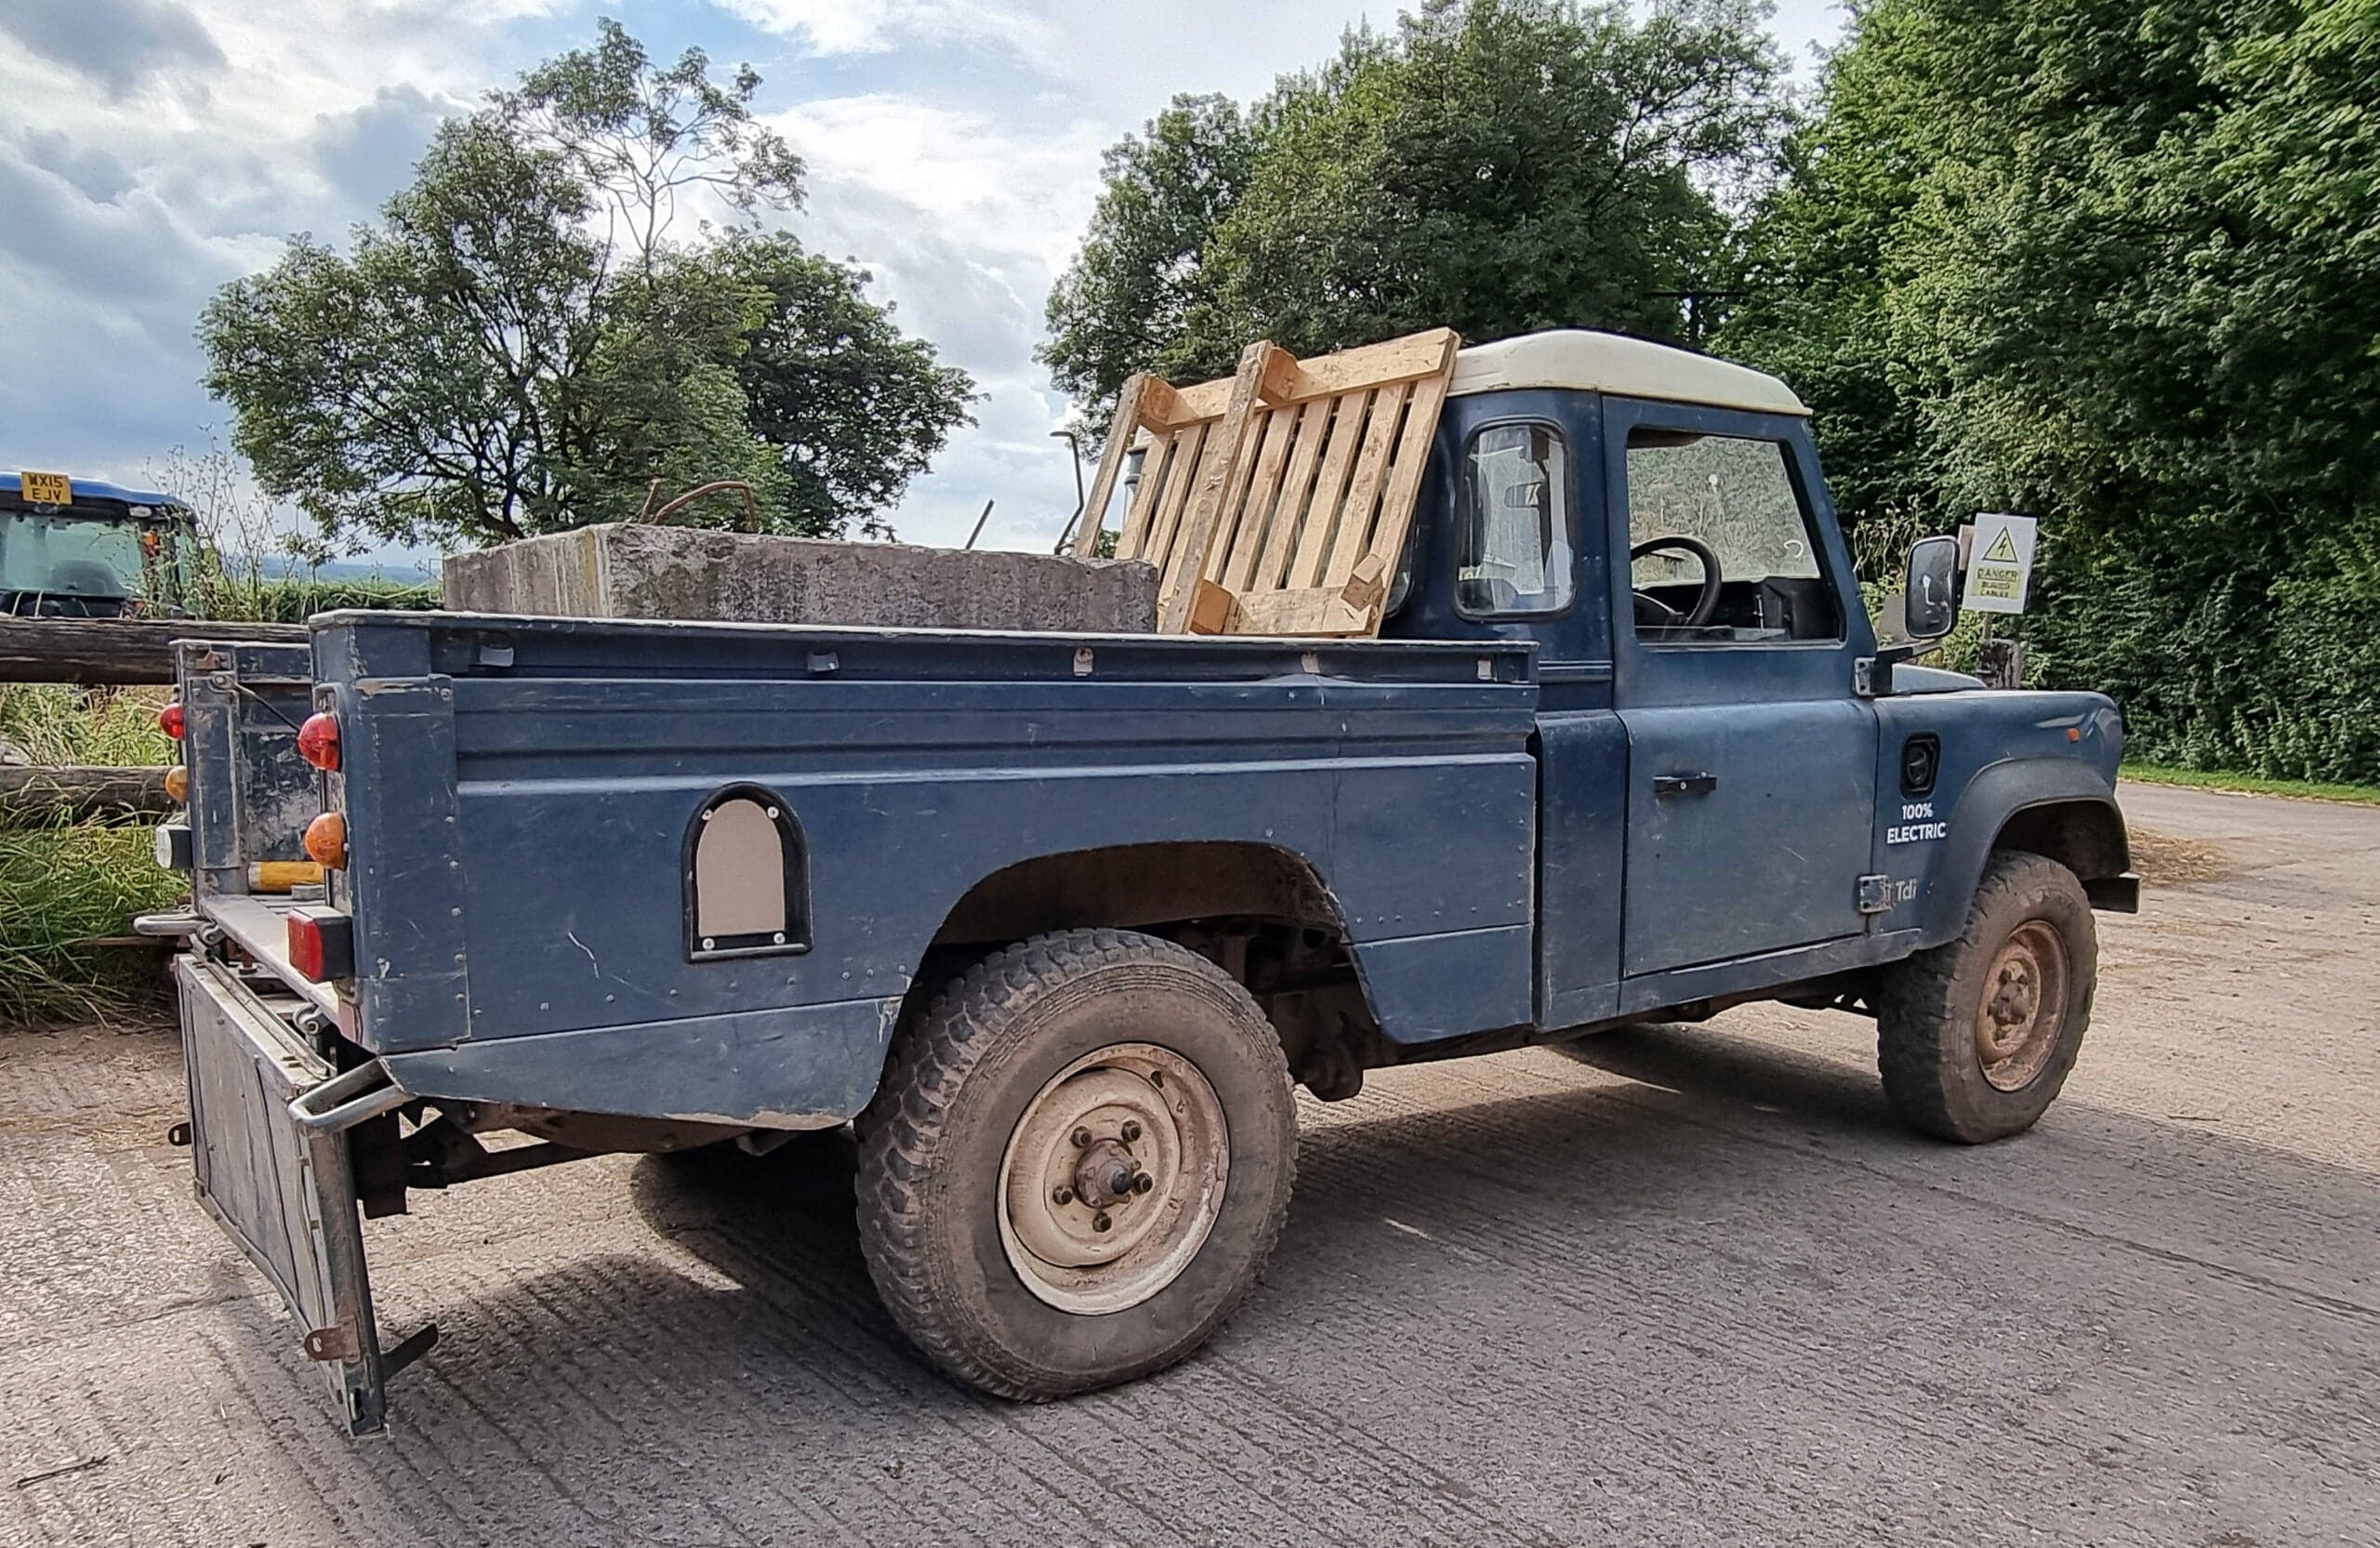 One of the converted Defender pickups